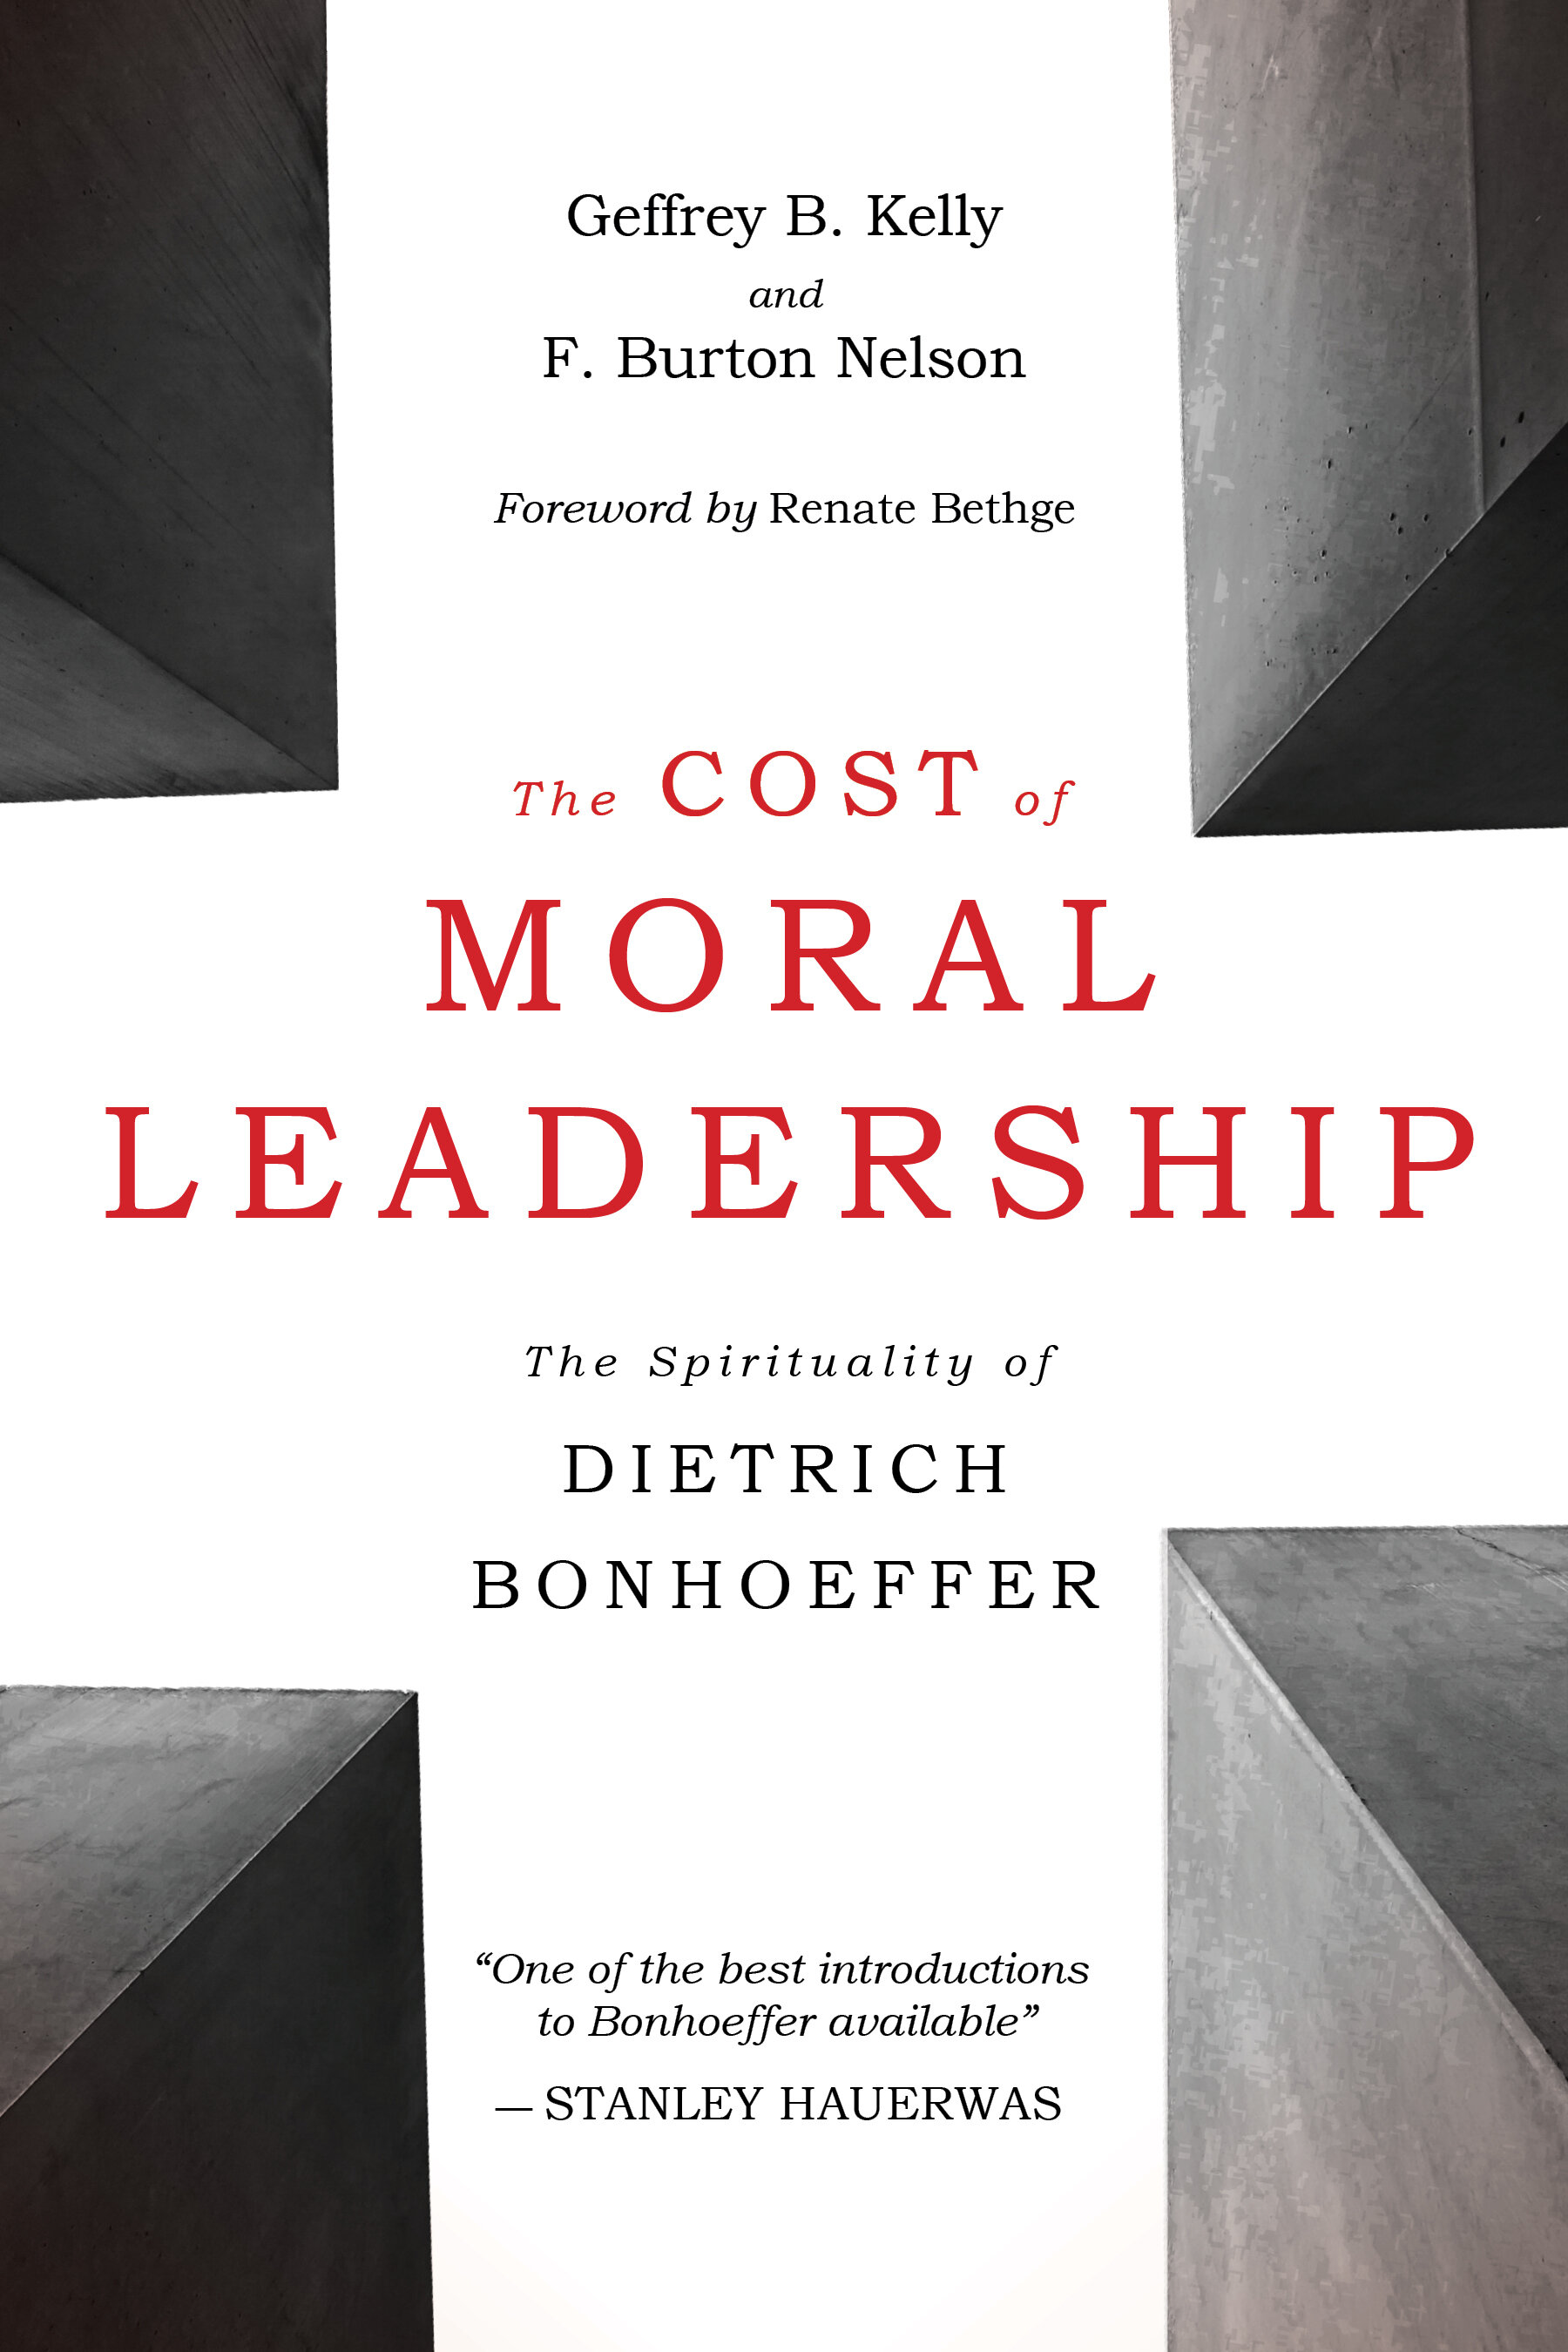 The Cost of Moral Leadership: The Spirituality of Dietrich Bonhoeffer